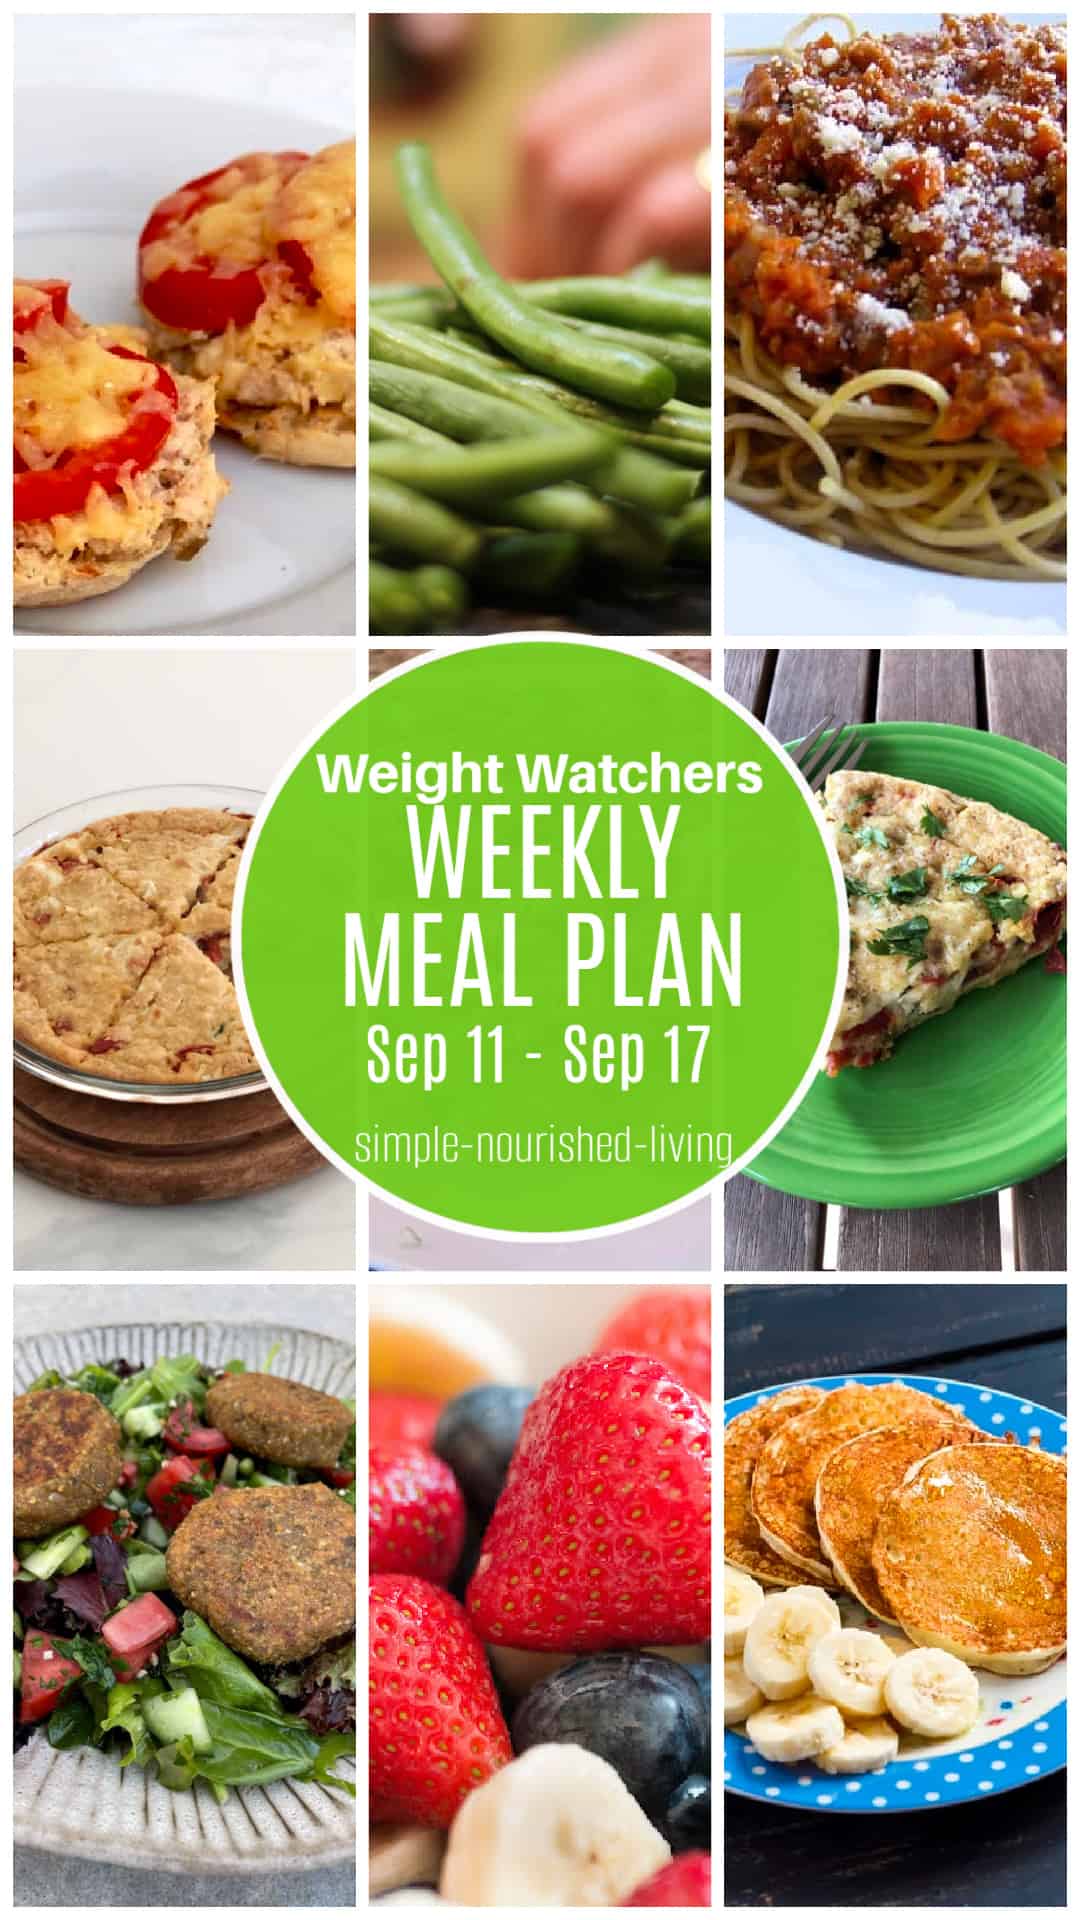 9 frame food photo collage featuring: tuna melts on english muffins, green beans, spaghetti sauce on pasta, zucchini pie, falafel salad, fresh berries and banana pancakes. Round green text box overlay in the center: Weight Watchers Weekly Meal Plan Sep 11 - Sep 17 